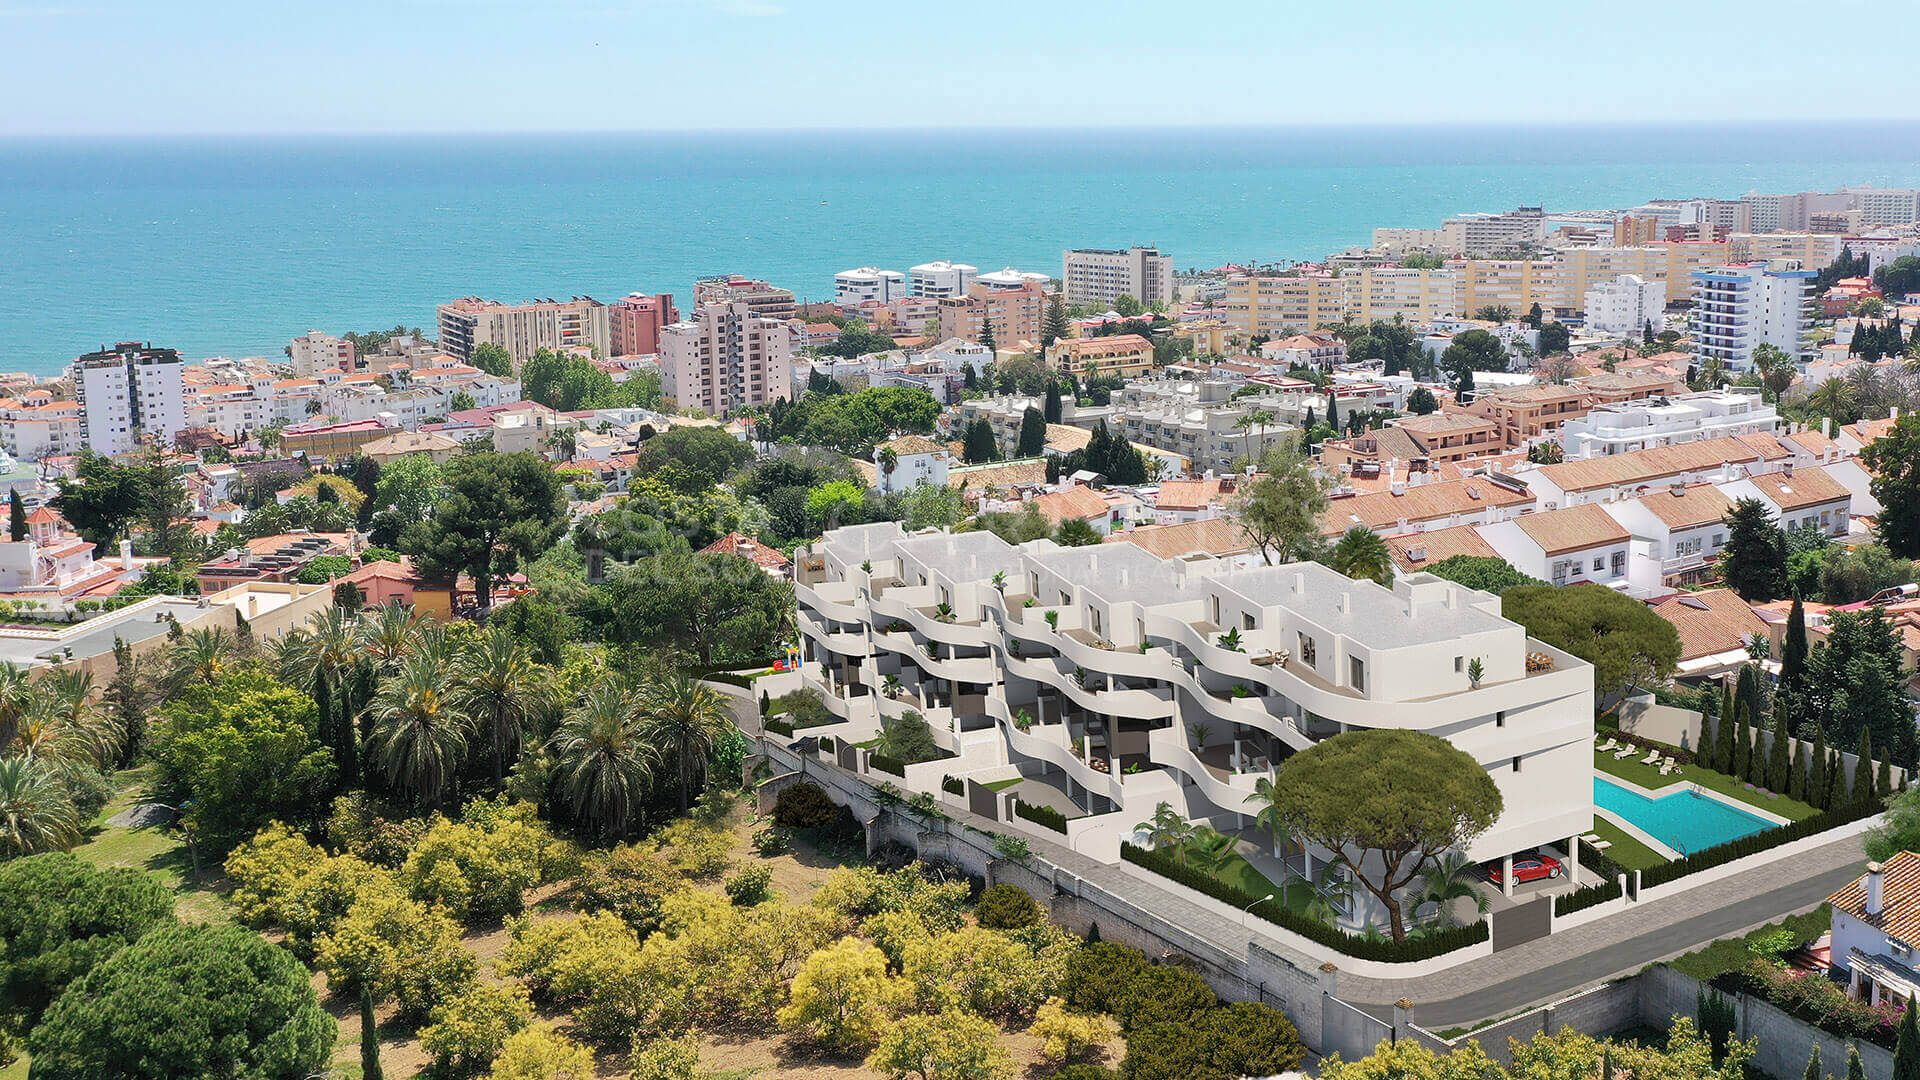 Development with high profitability for investment in Torremolinos